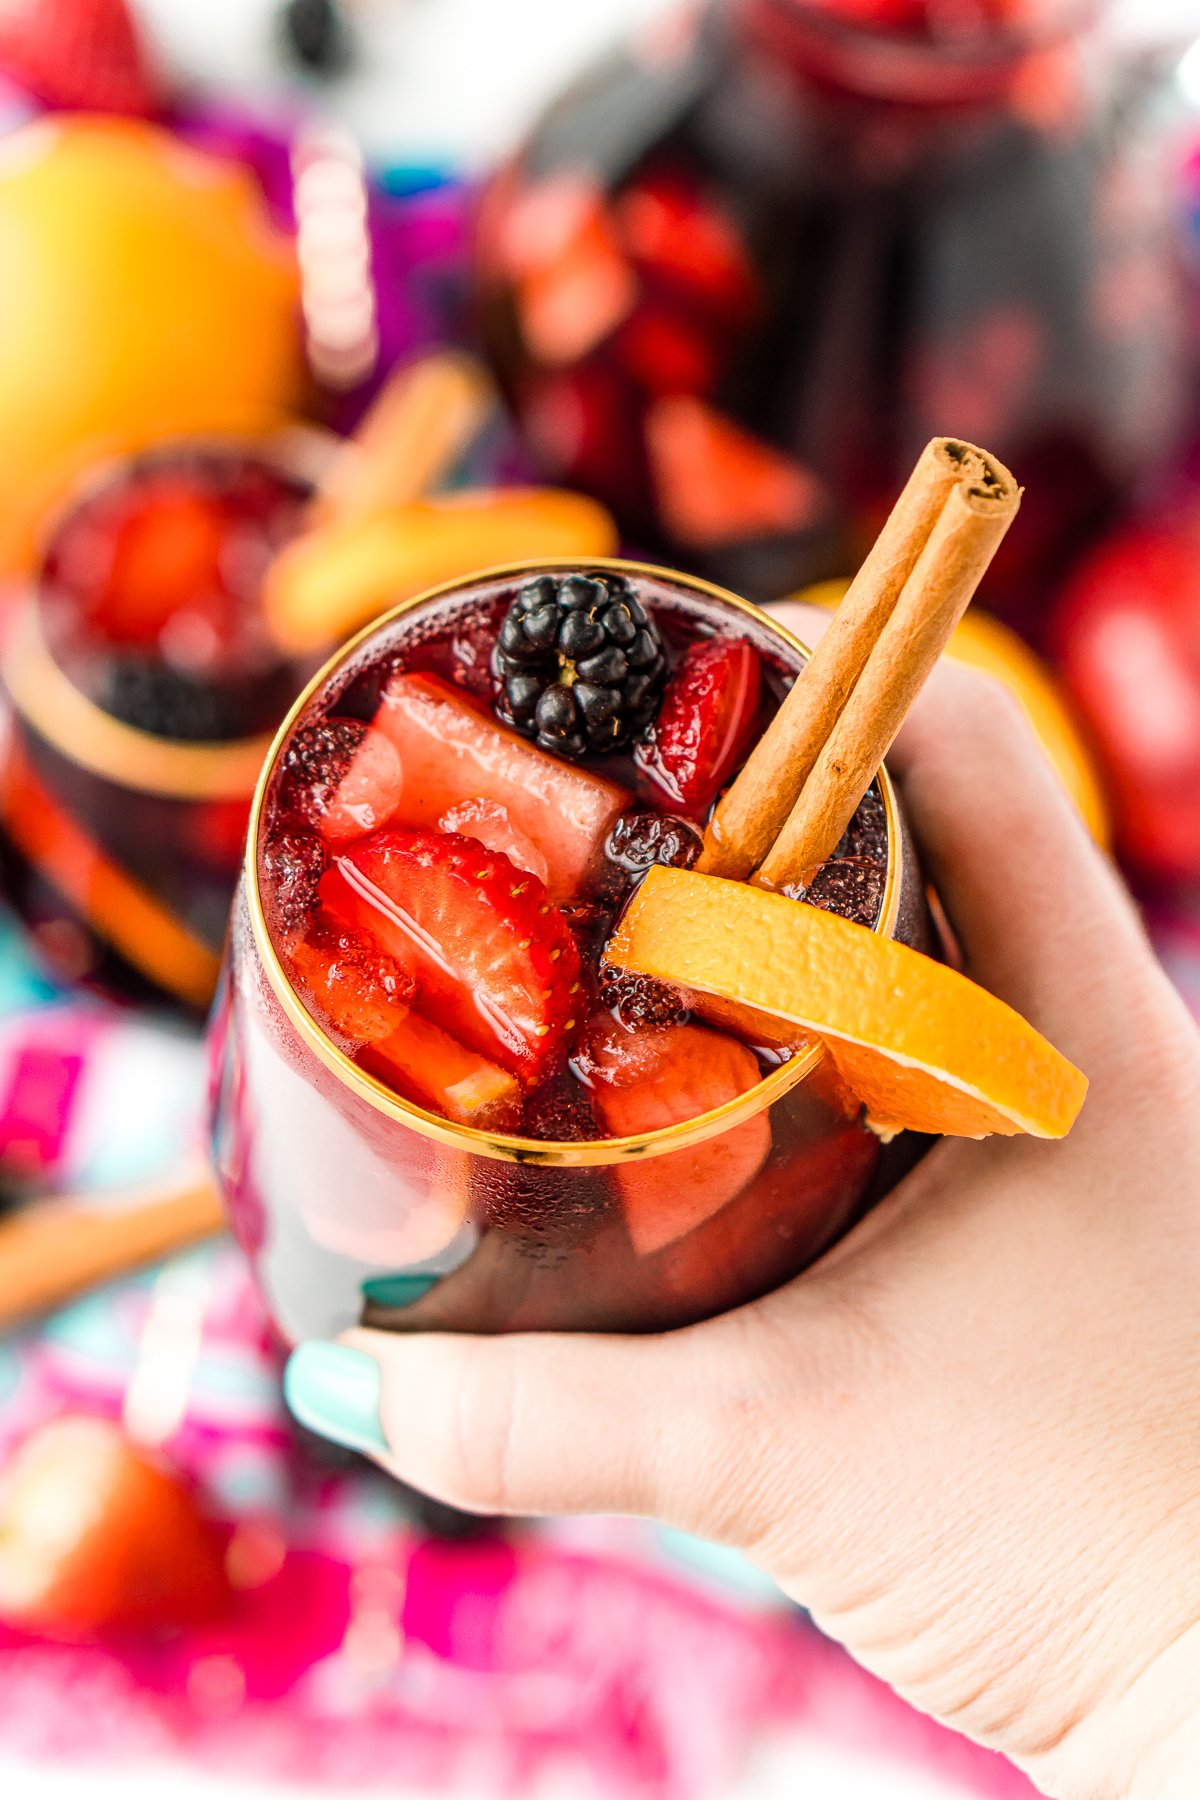 Woman's hand holding a glass filled with sangria wine.